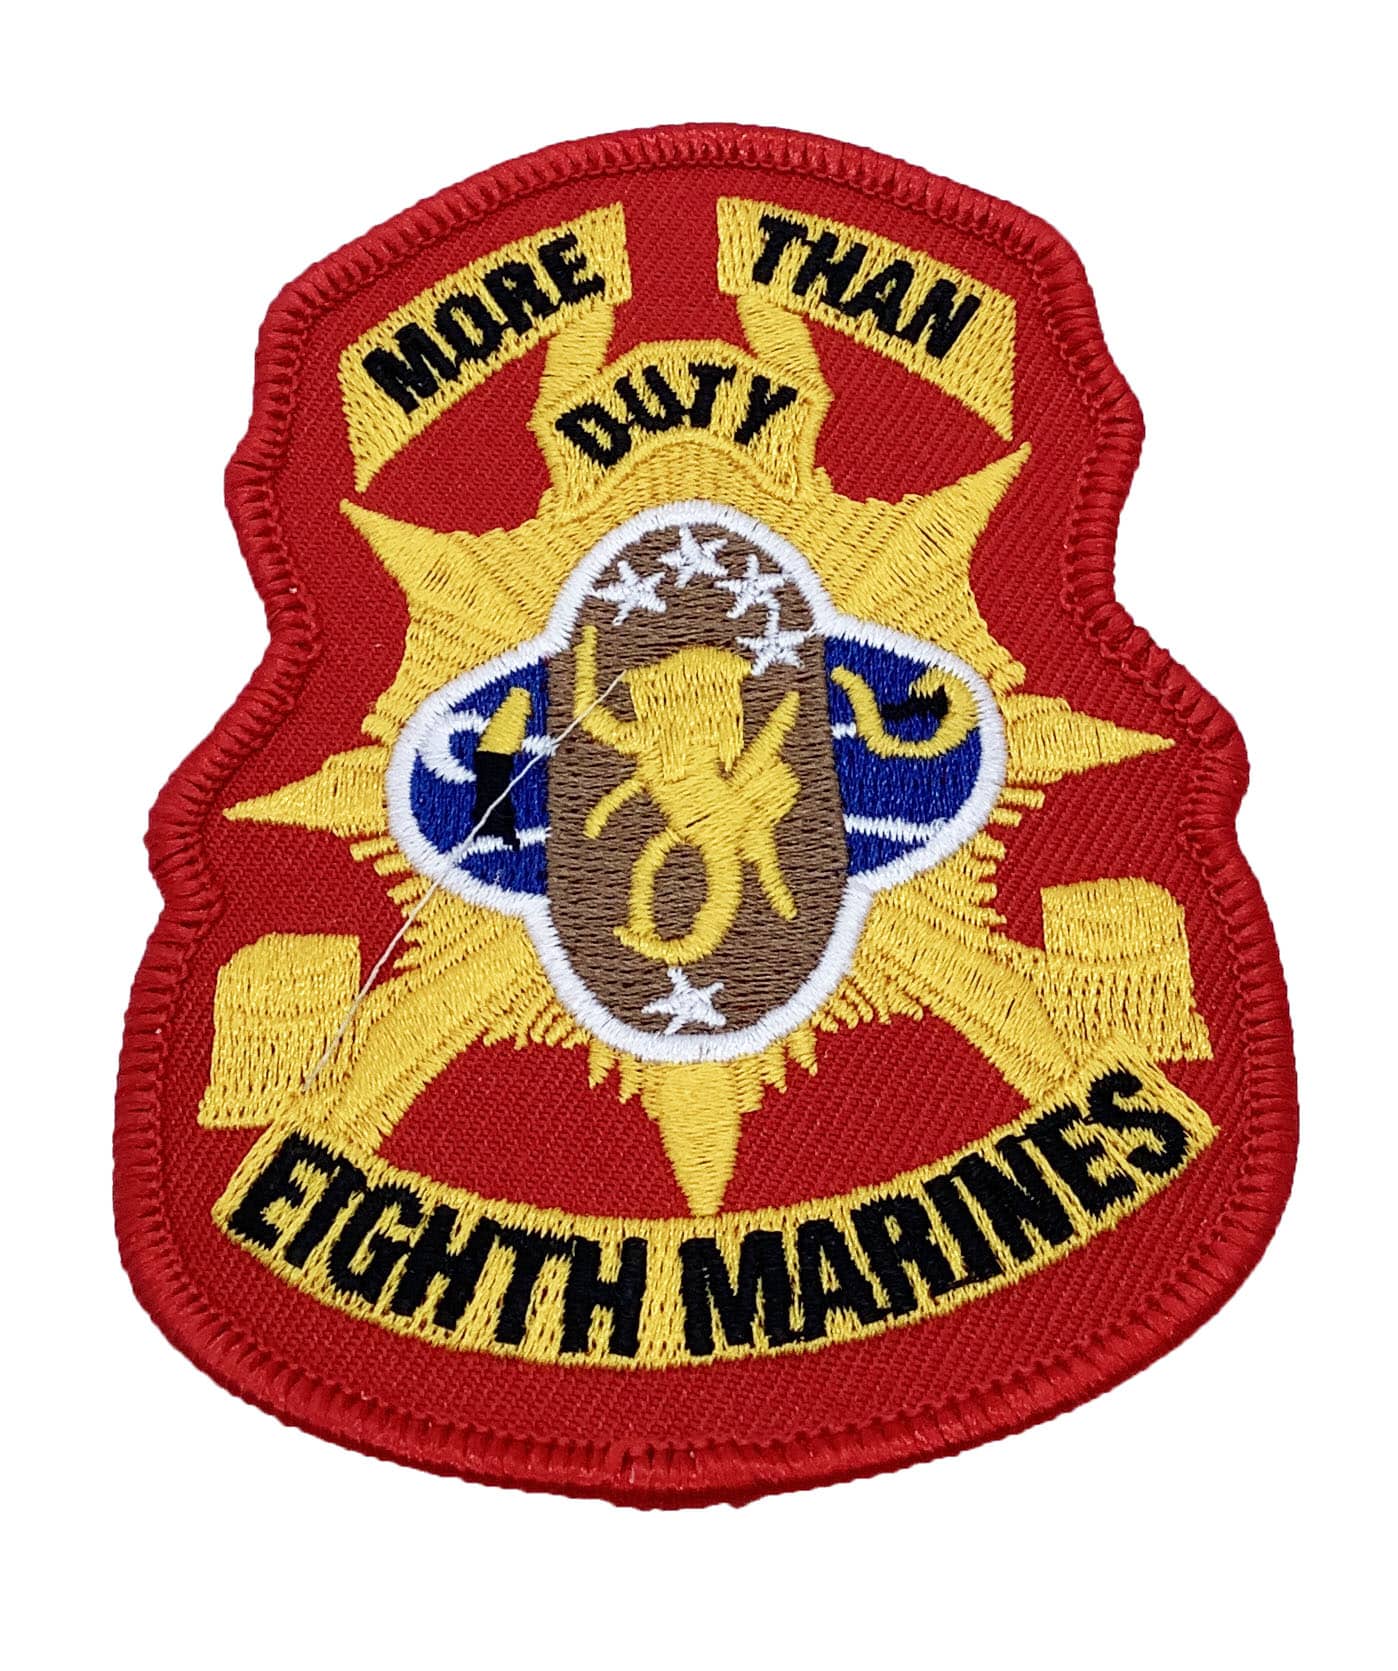 USMC - embroidered patch 8x8 CM